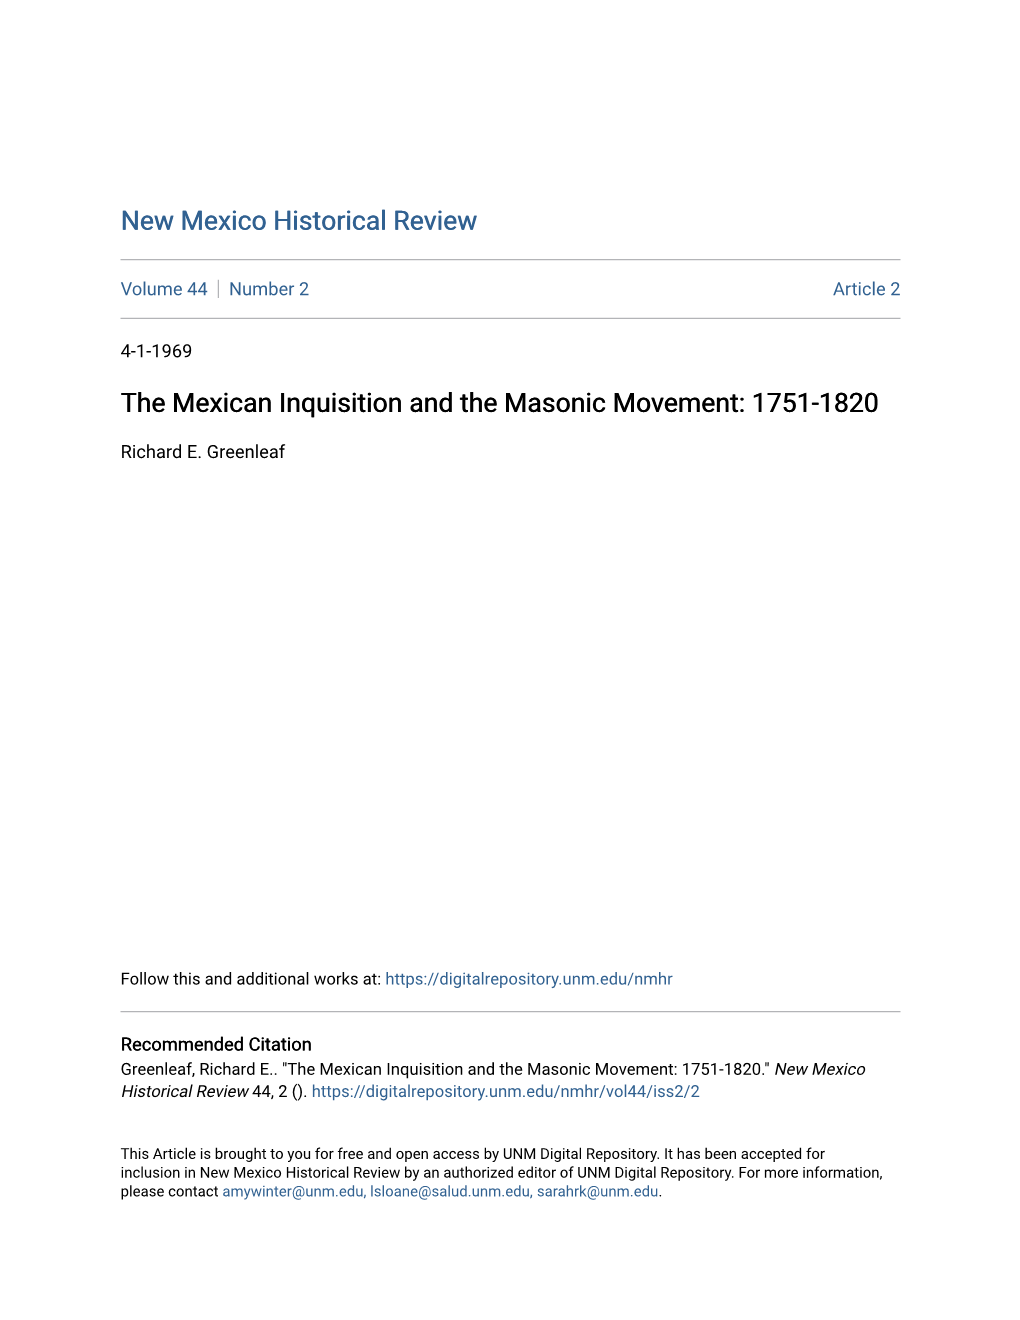 The Mexican Inquisition and the Masonic Movement: 1751-1820